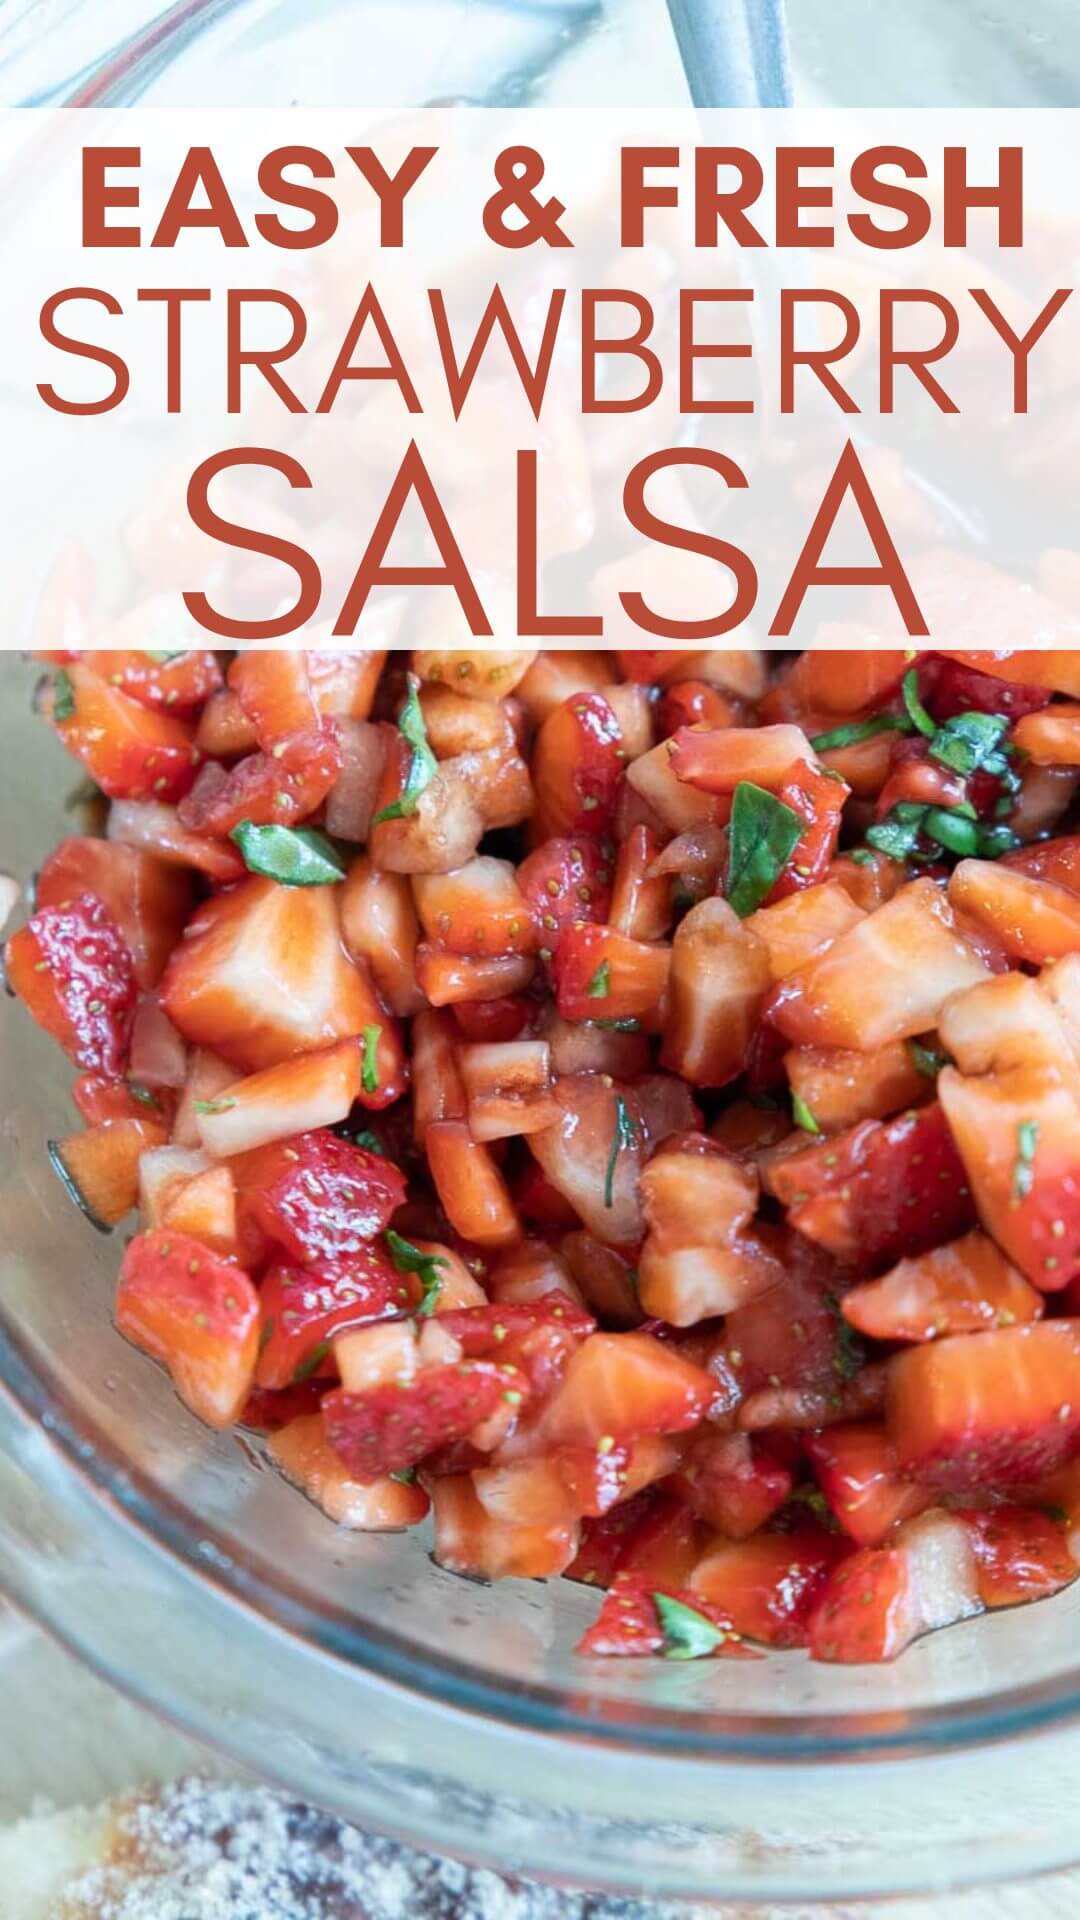 A combination of fresh strawberries, herbs, balsamic vinegar, and brown sugar creates an amazing and fresh take on a summer dessert. Enjoy this strawberry salsa with cinnamon and sugar chips, sweet breads, cakes, and more.